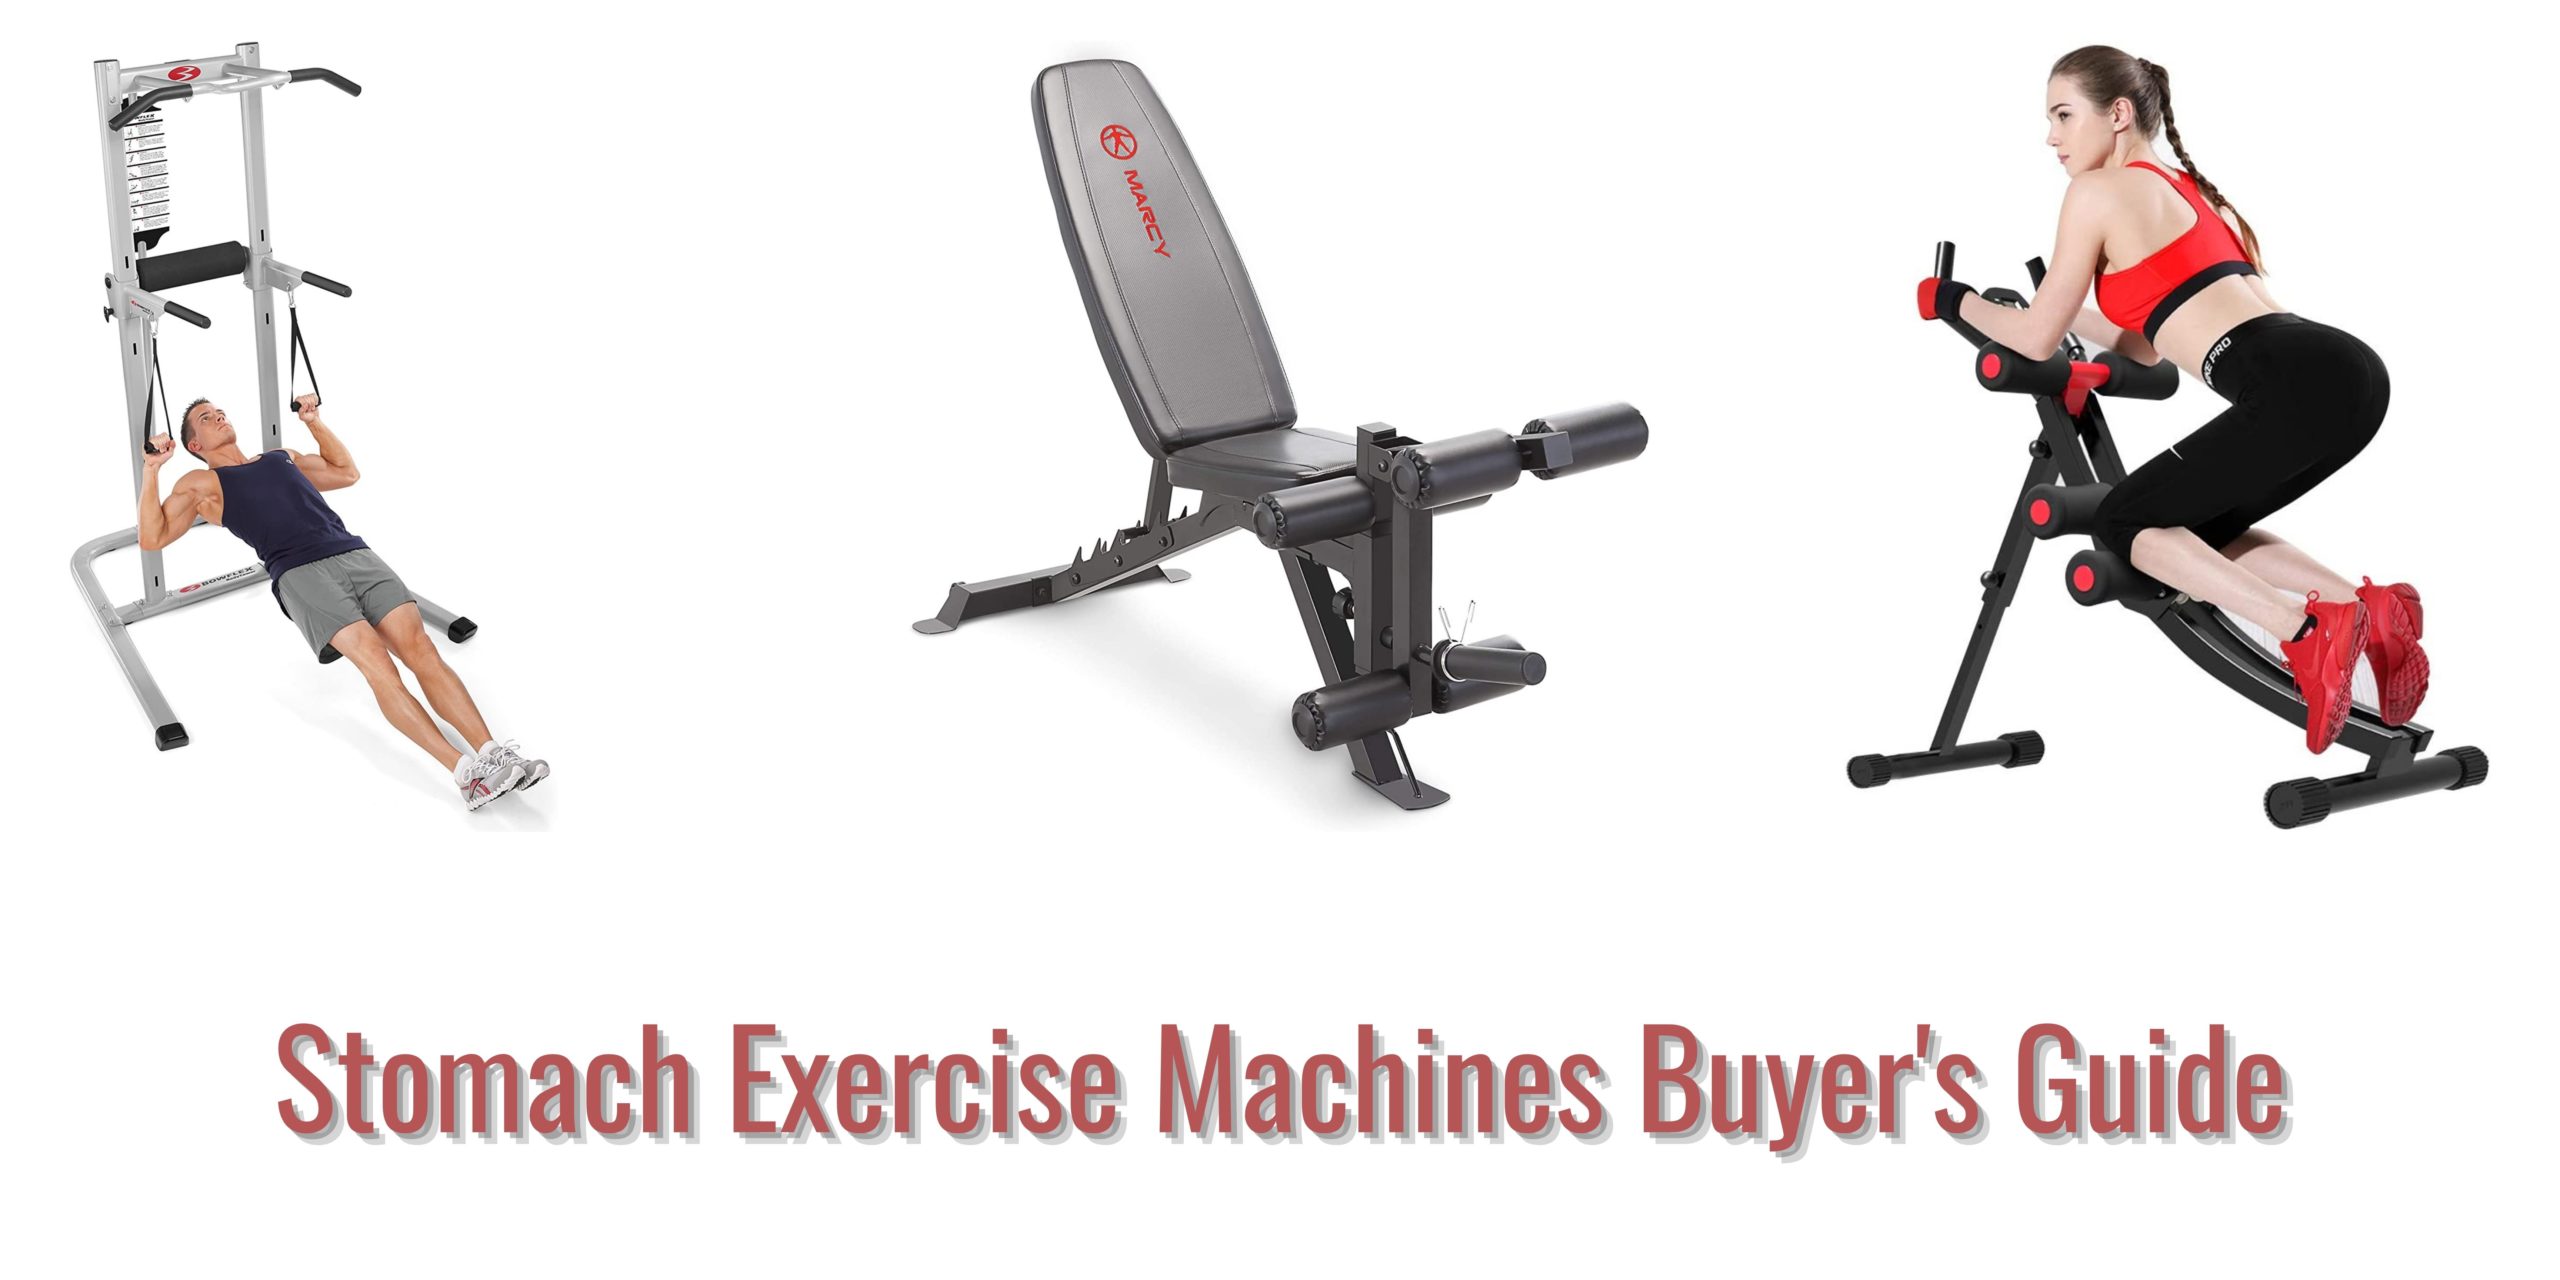 Stomach Exercise Machines Buyers Guide scaled